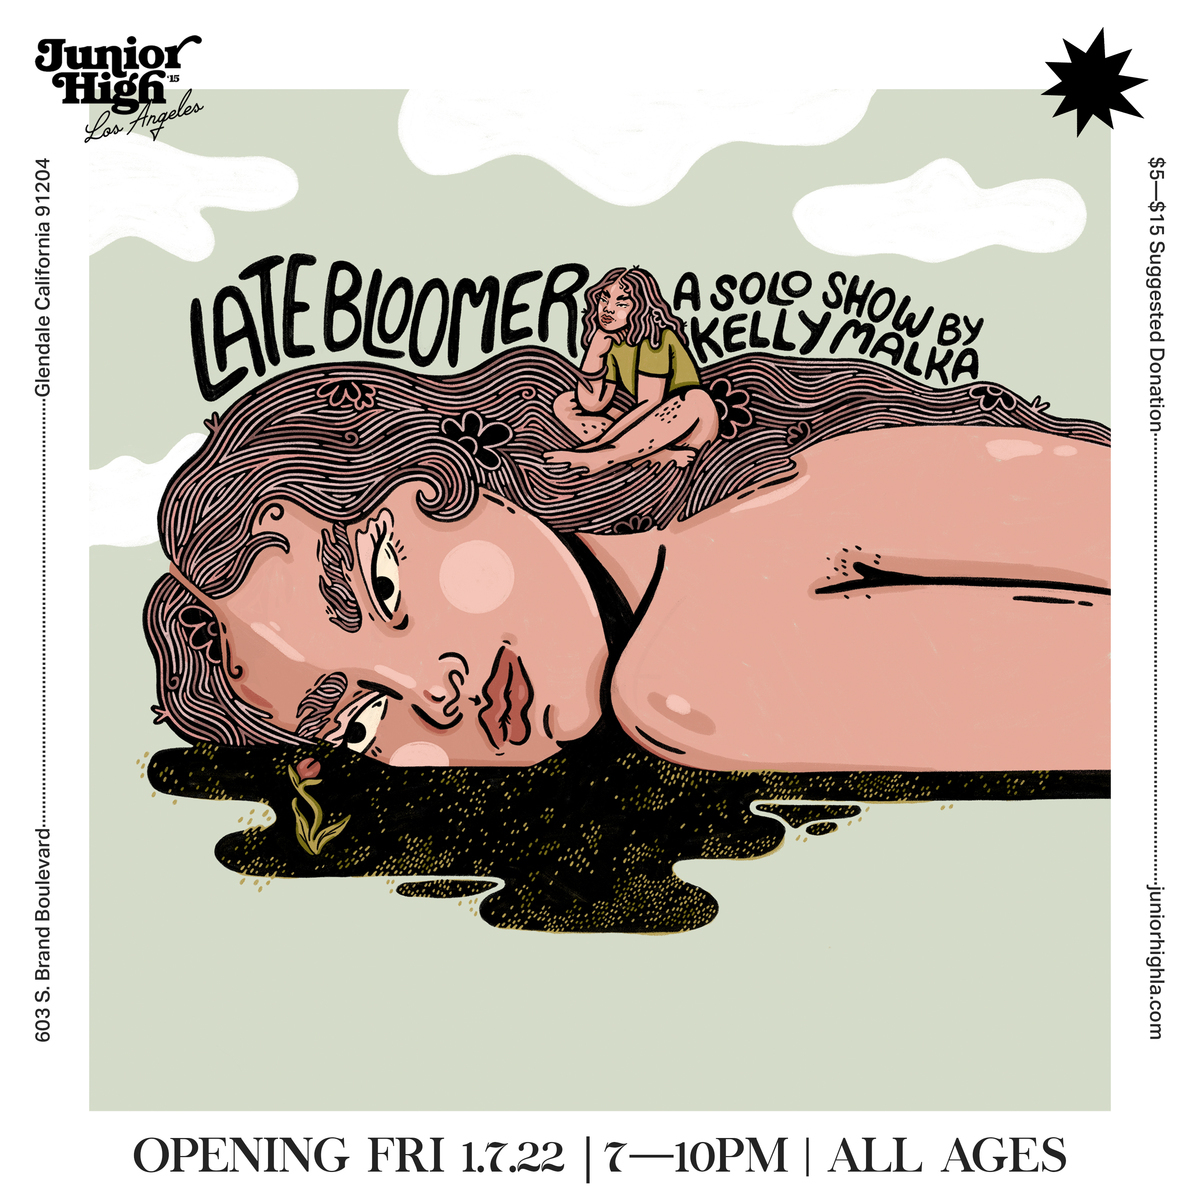 Late Bloomer - Solo Show at Junior High Gallery, LA